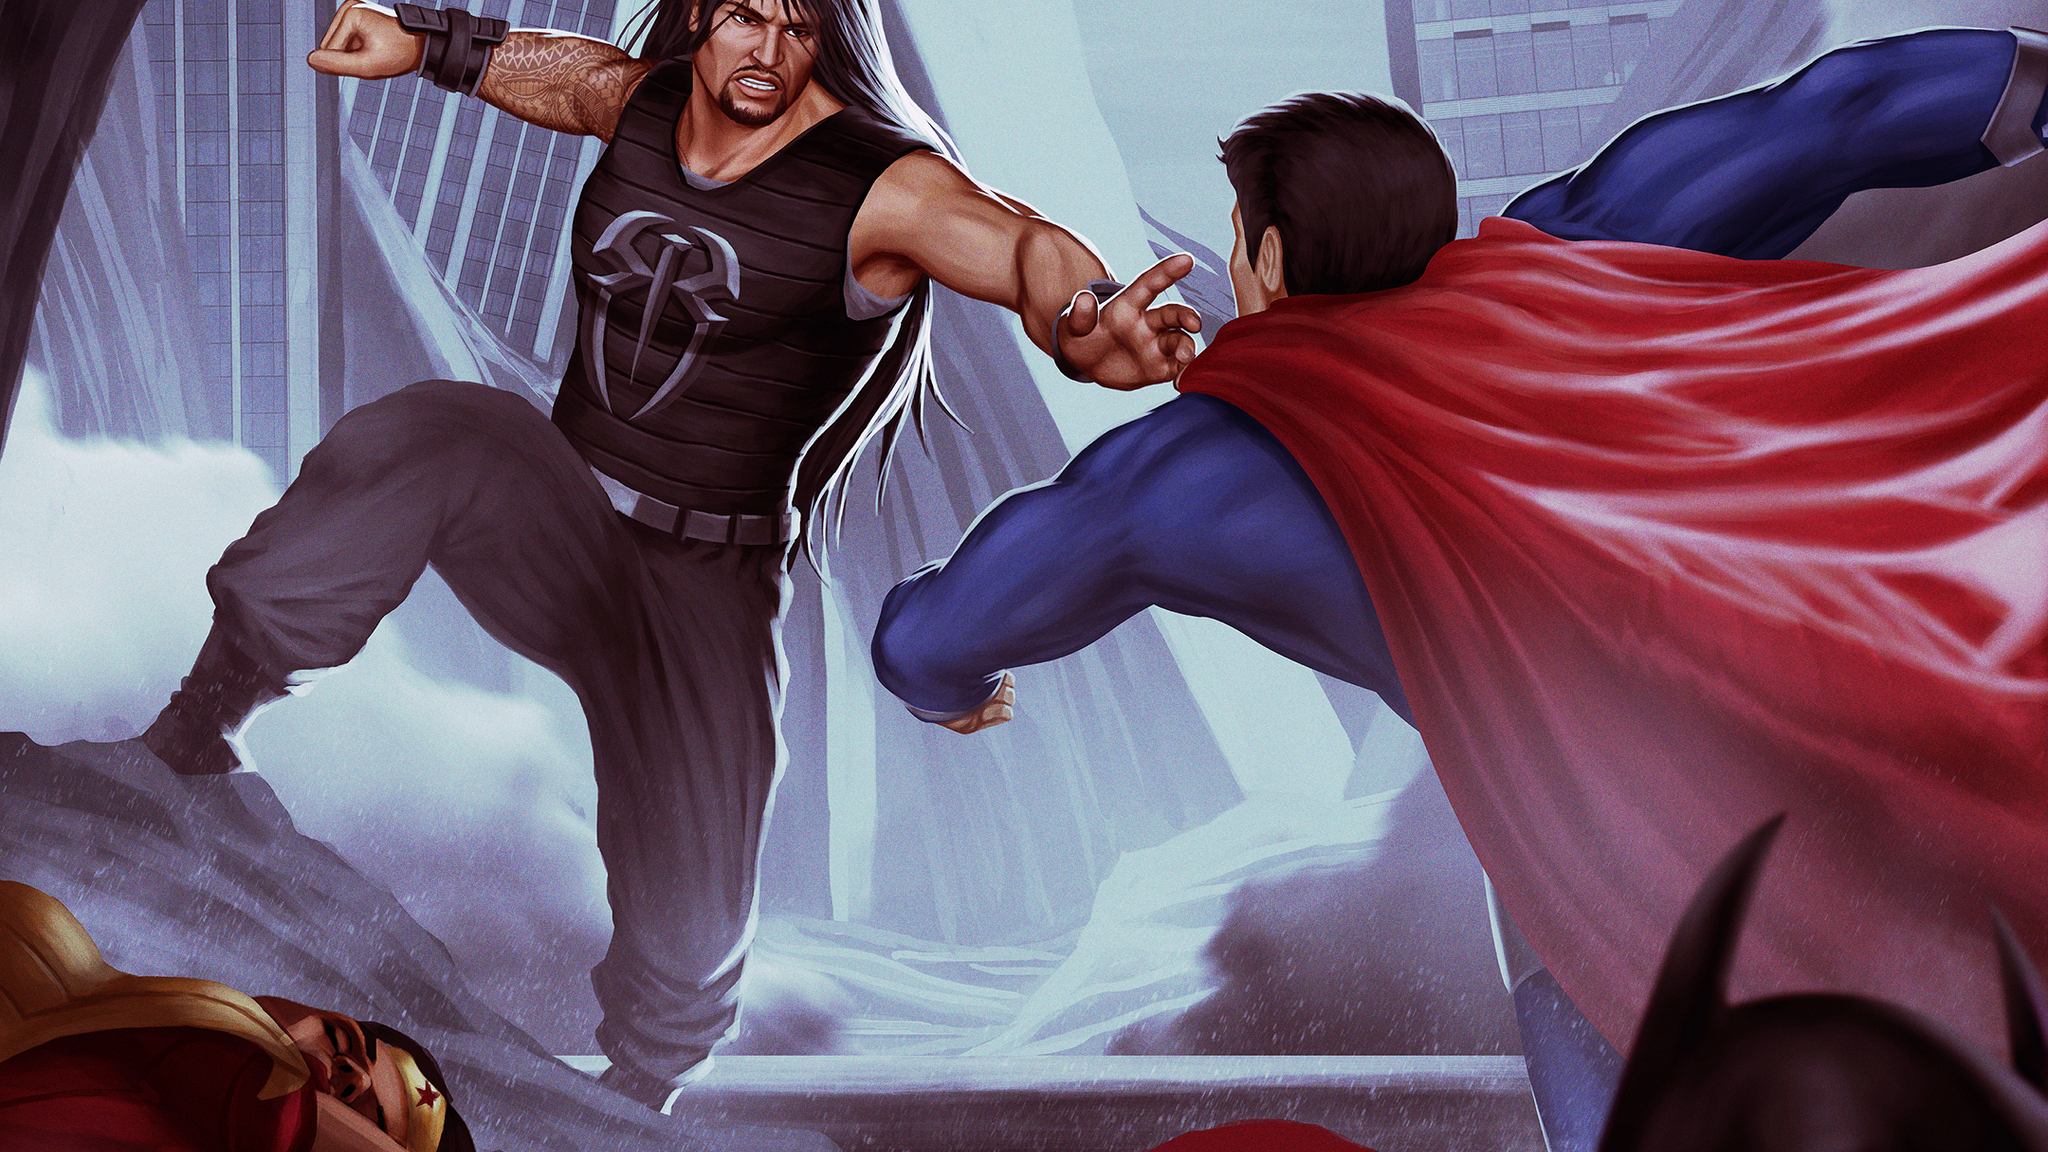 2048x1152 Roman Reigns Vs Superman Art 2048x1152 Resolution HD 4k Wallpapers,  Images, Backgrounds, Photos and Pictures